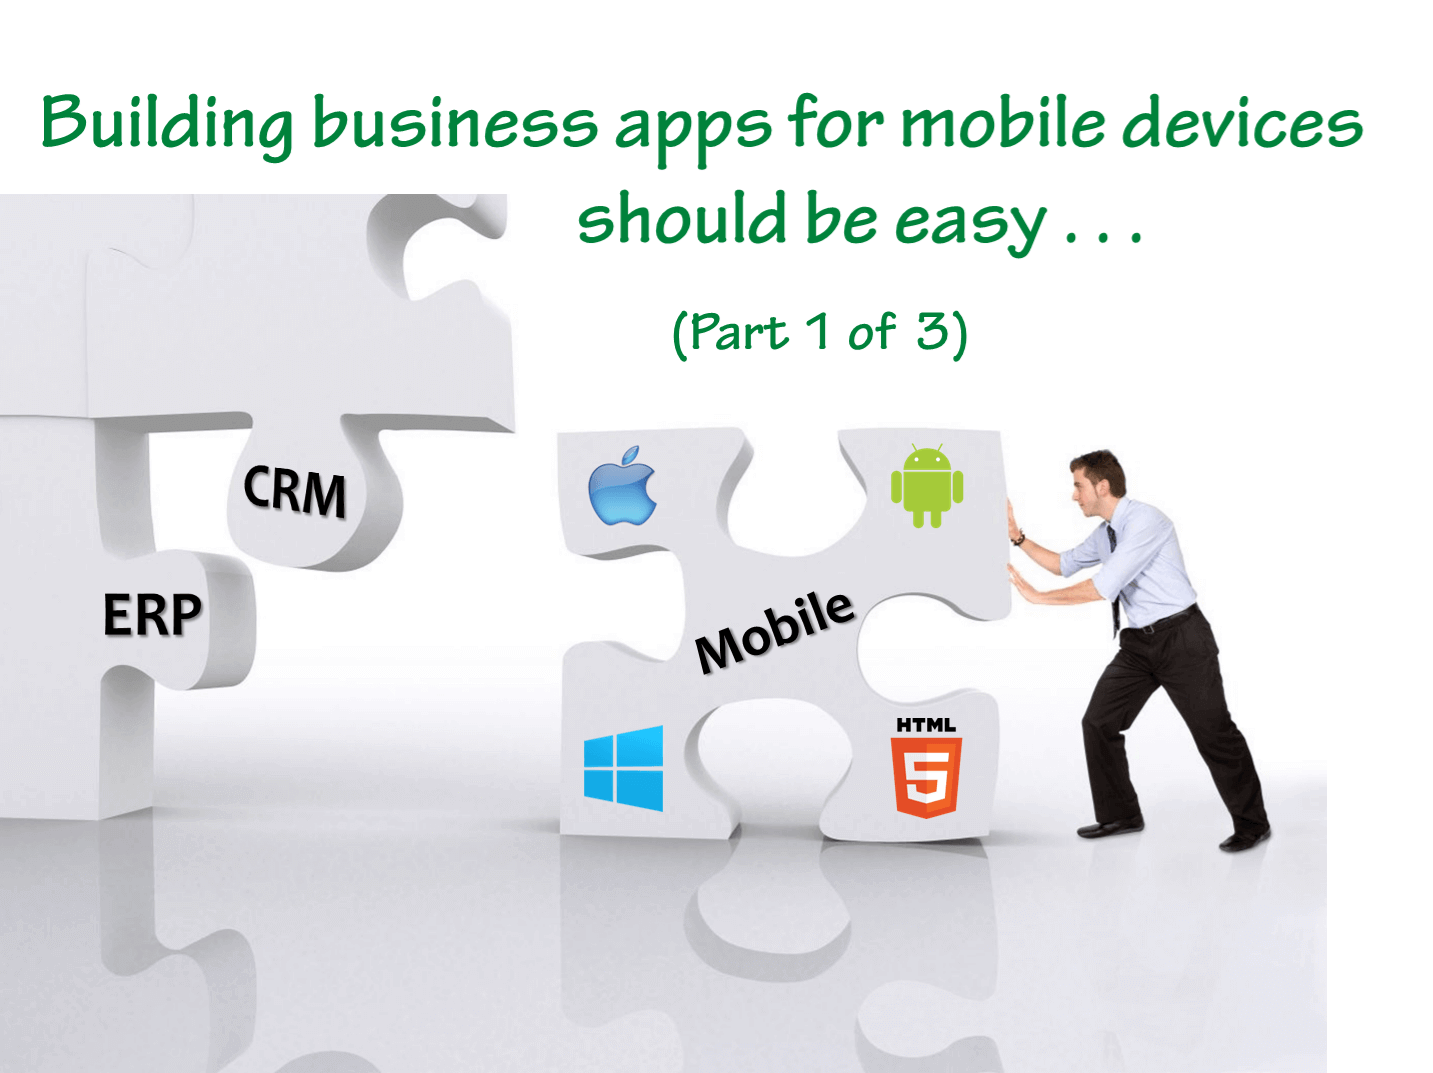 Building business apps for mobile devices should be easy (part 1)